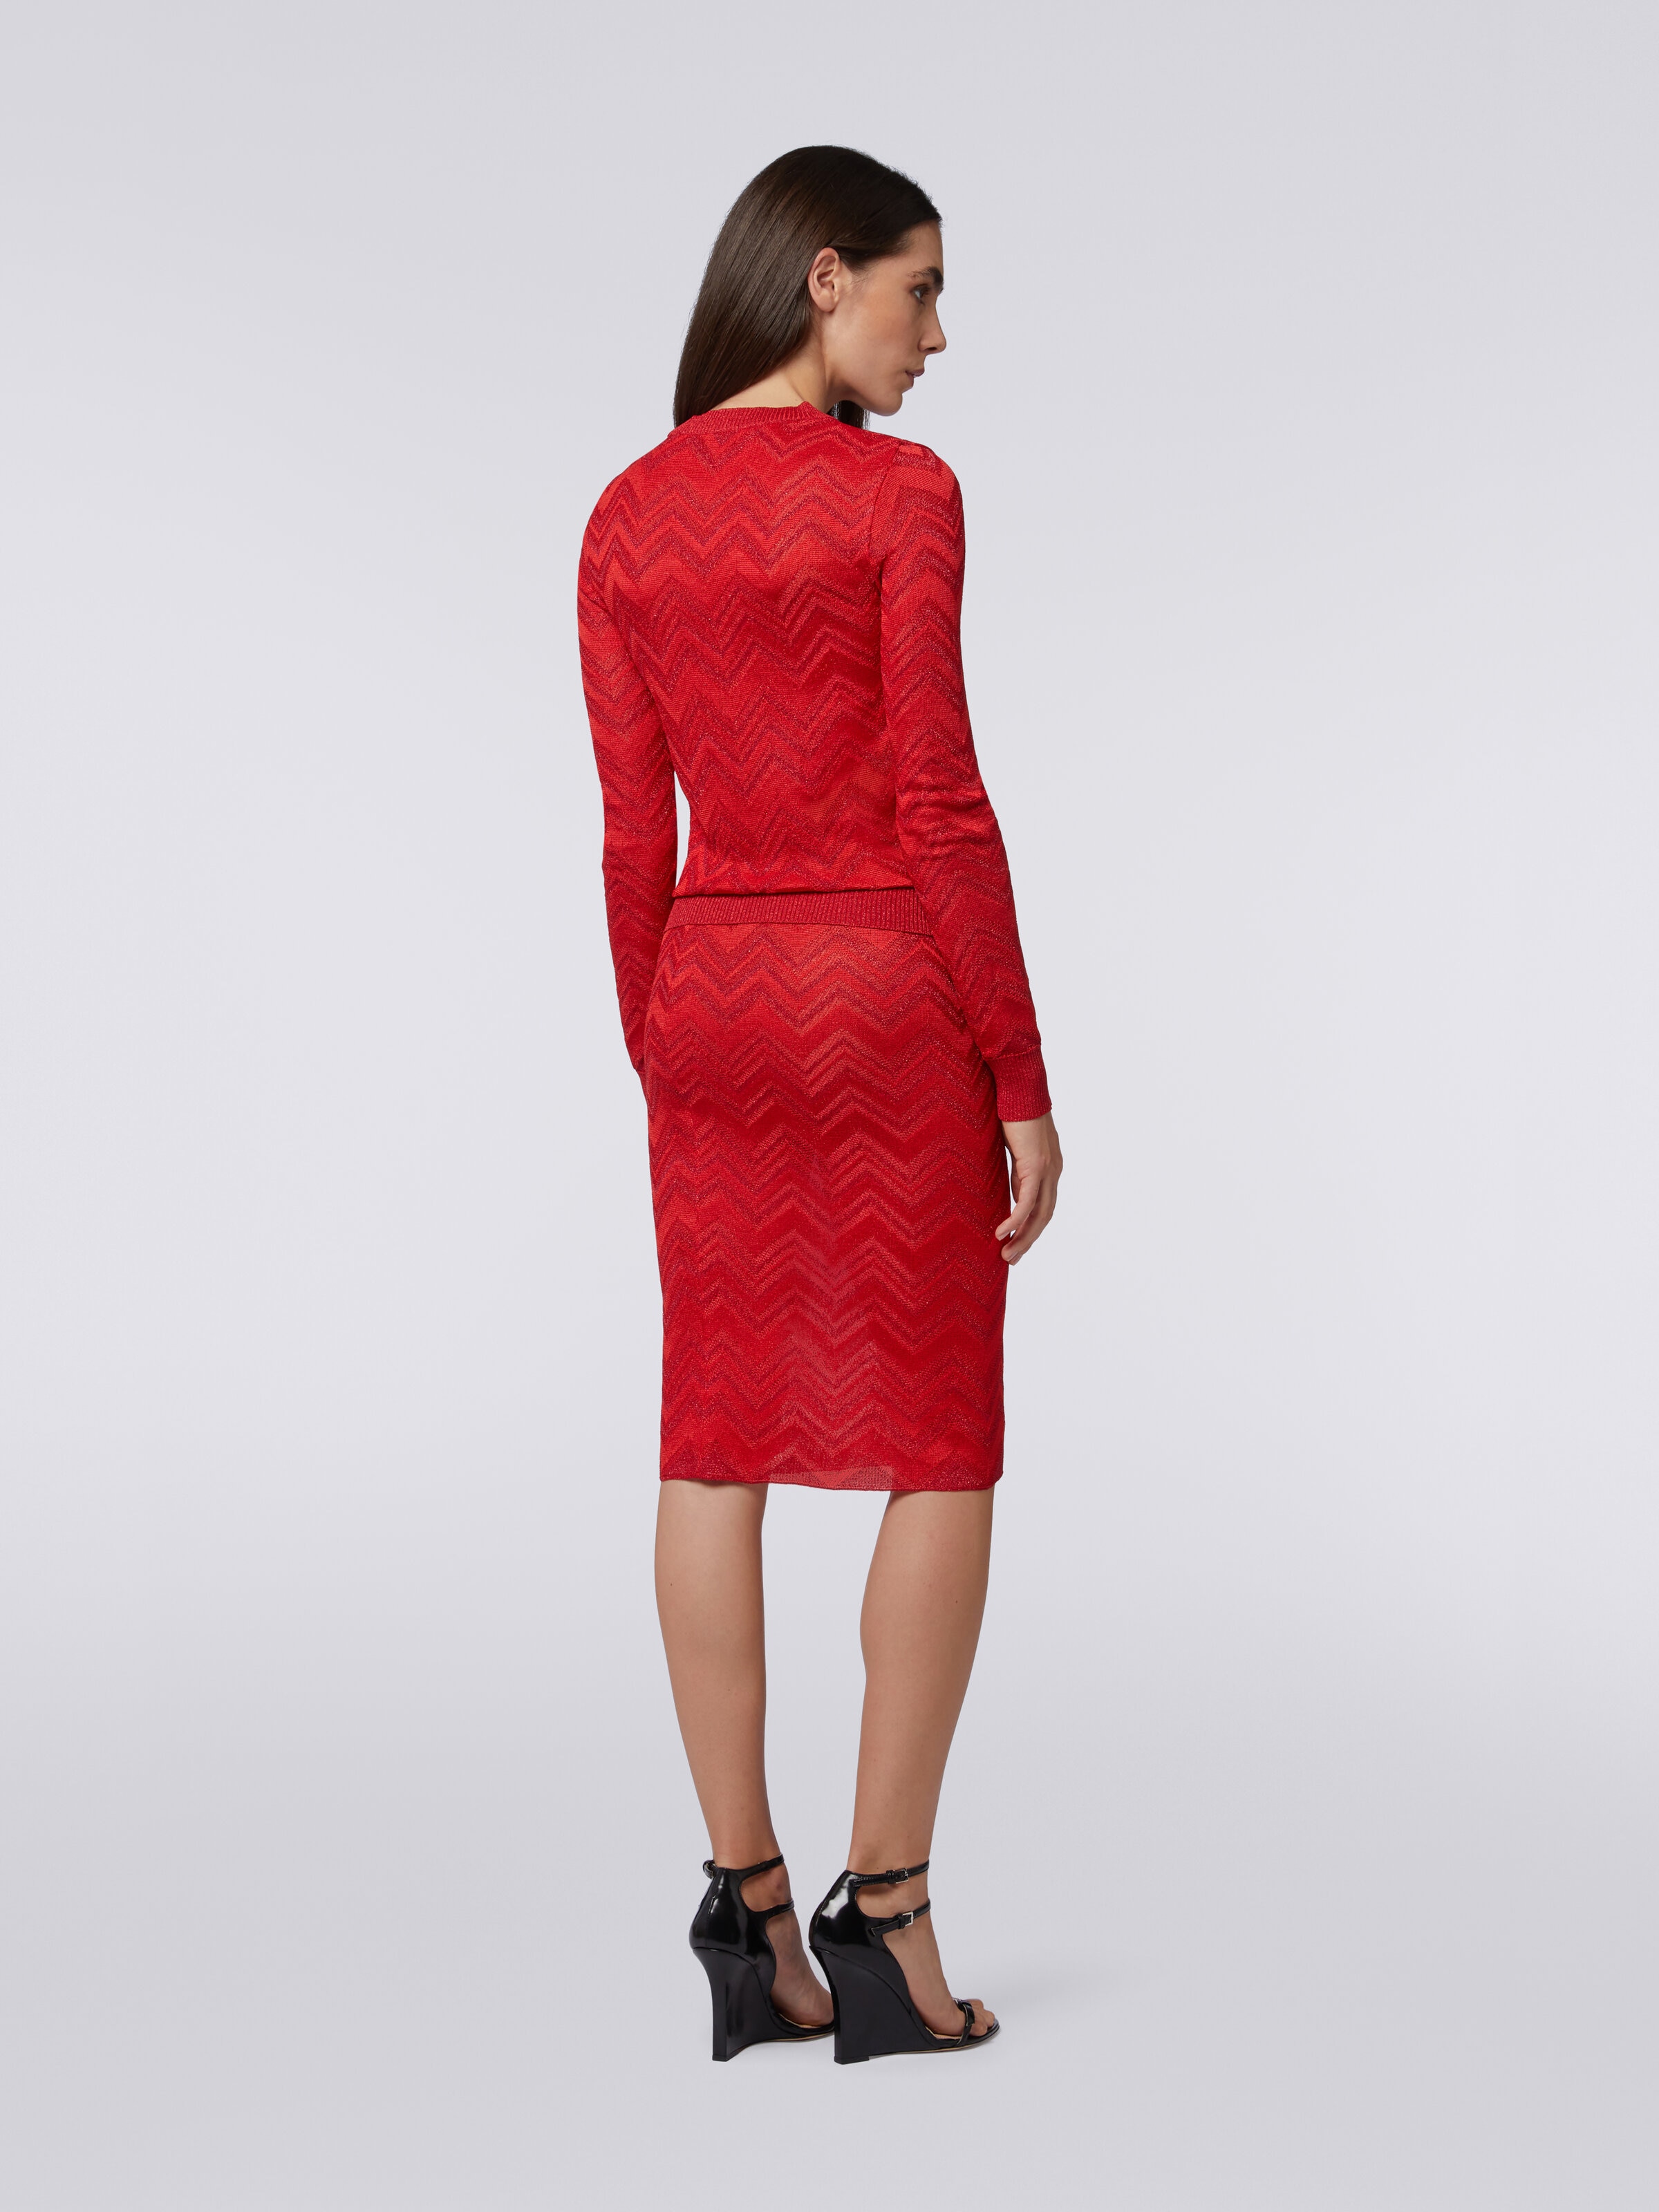 Longuette skirt in zigzag knit with lurex, Red  - 3